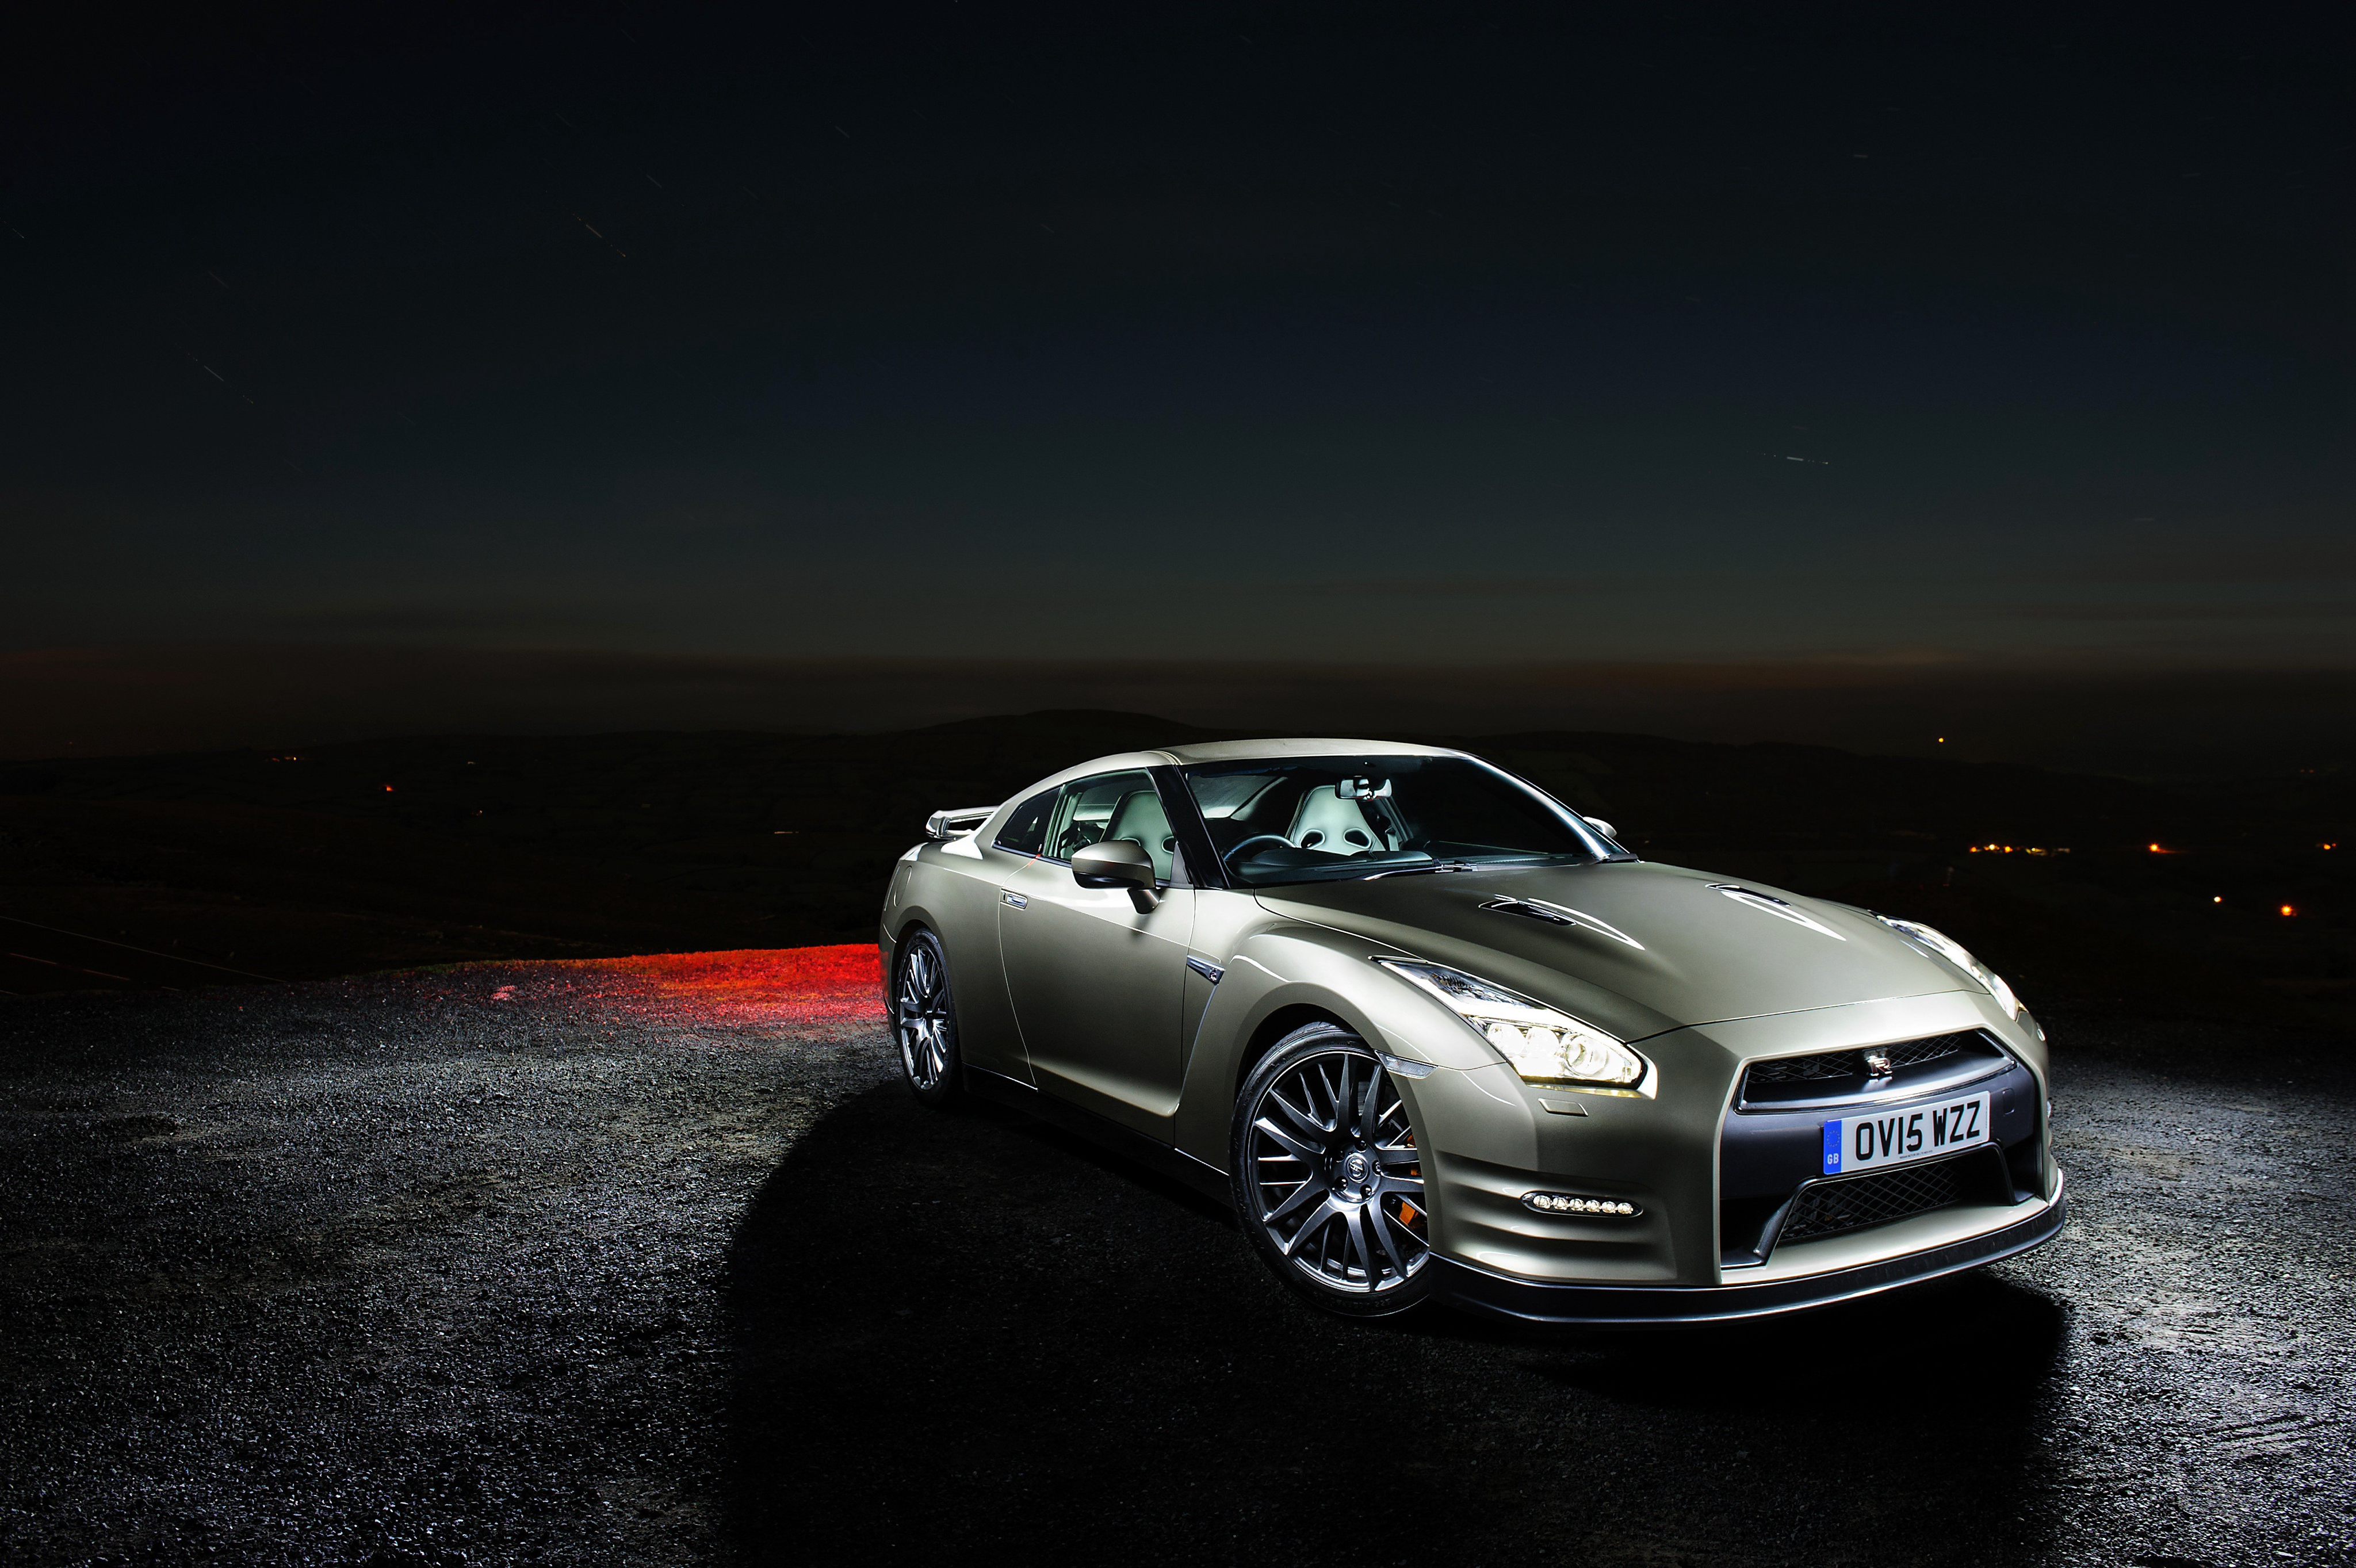 55941 download wallpaper nissan, night, cars, side view, gt-r screensavers and pictures for free